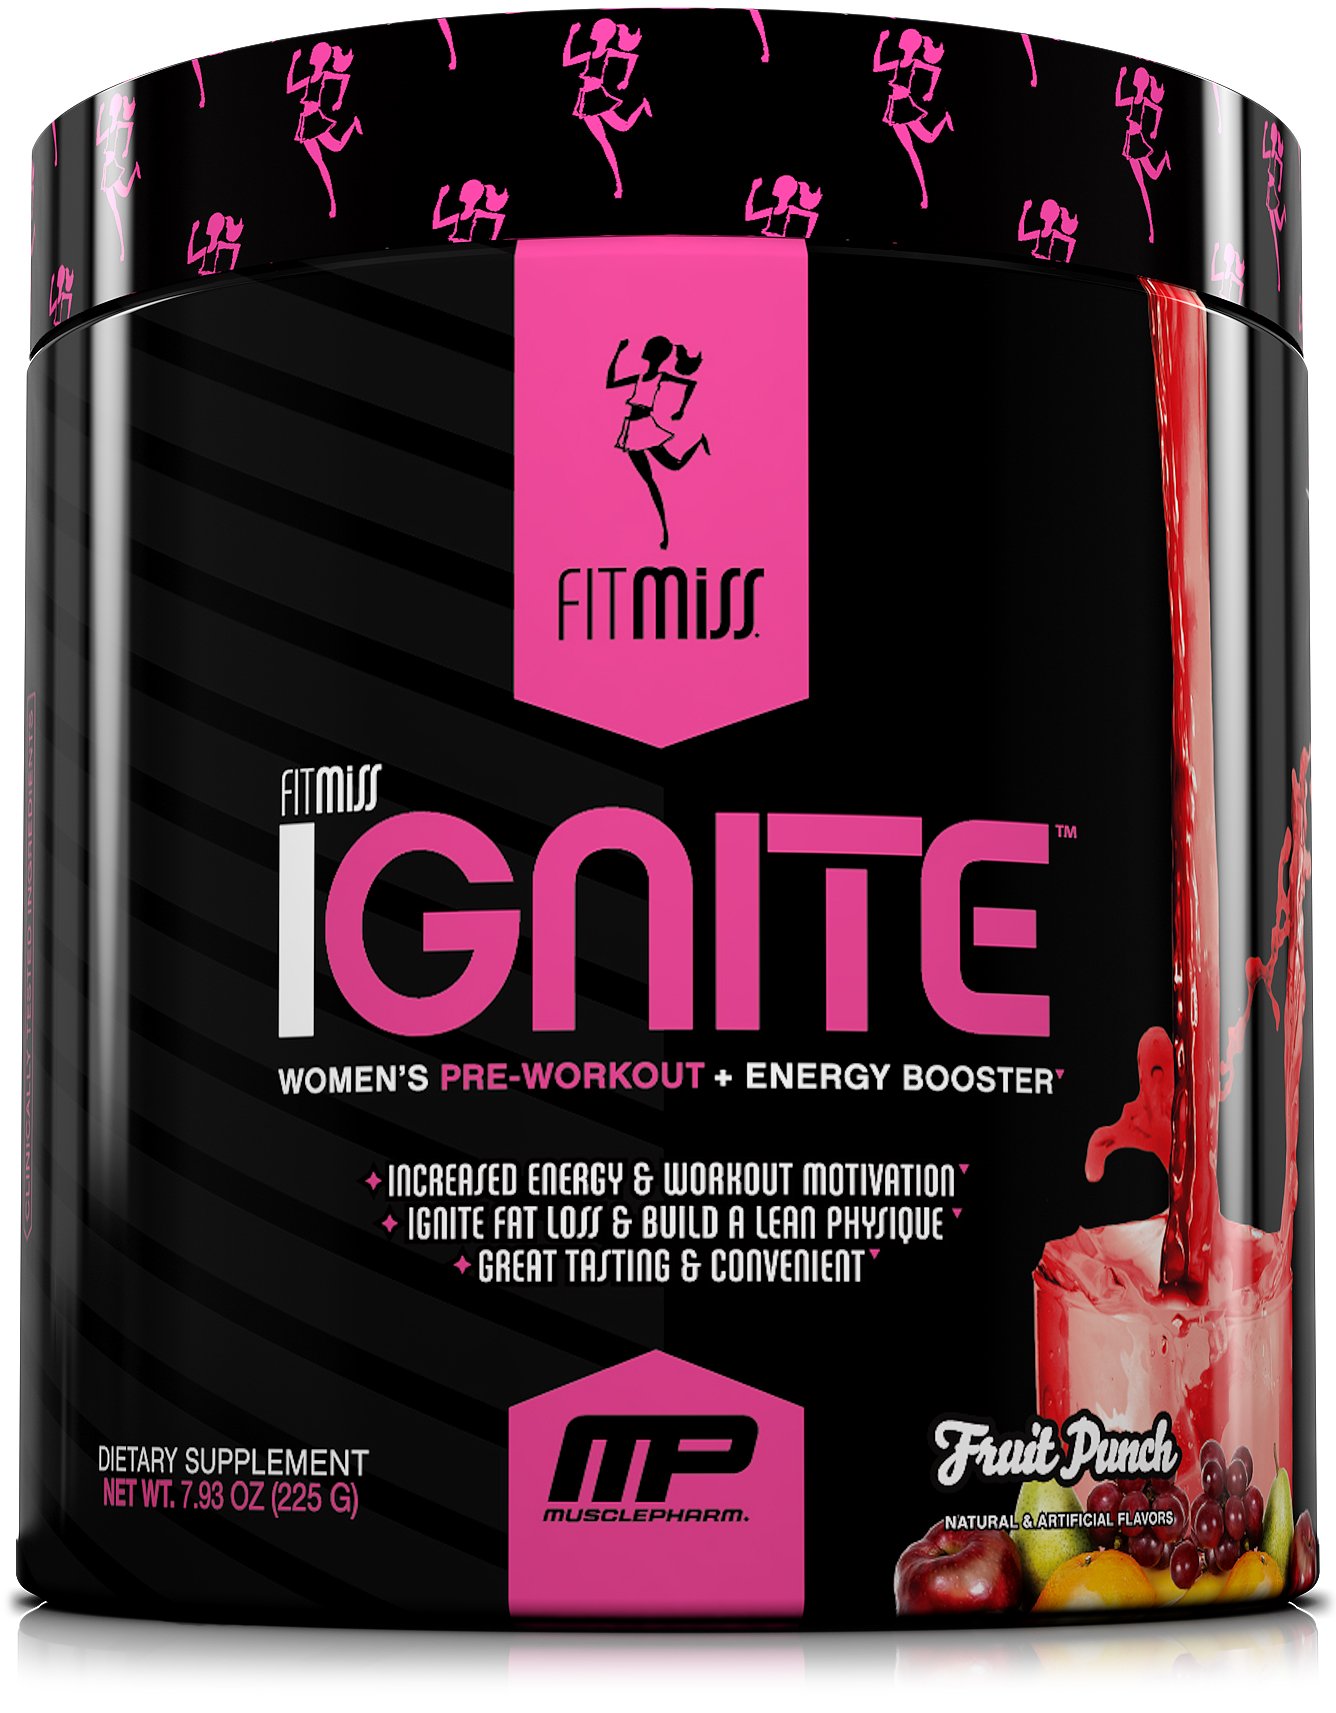 Book Cover FitMiss Ignite, Women's Pre-Workout Supplement & Energy Booster for Fat Loss, Supports Energy & Workout Motivation, Fruit Punch, 30 Servings